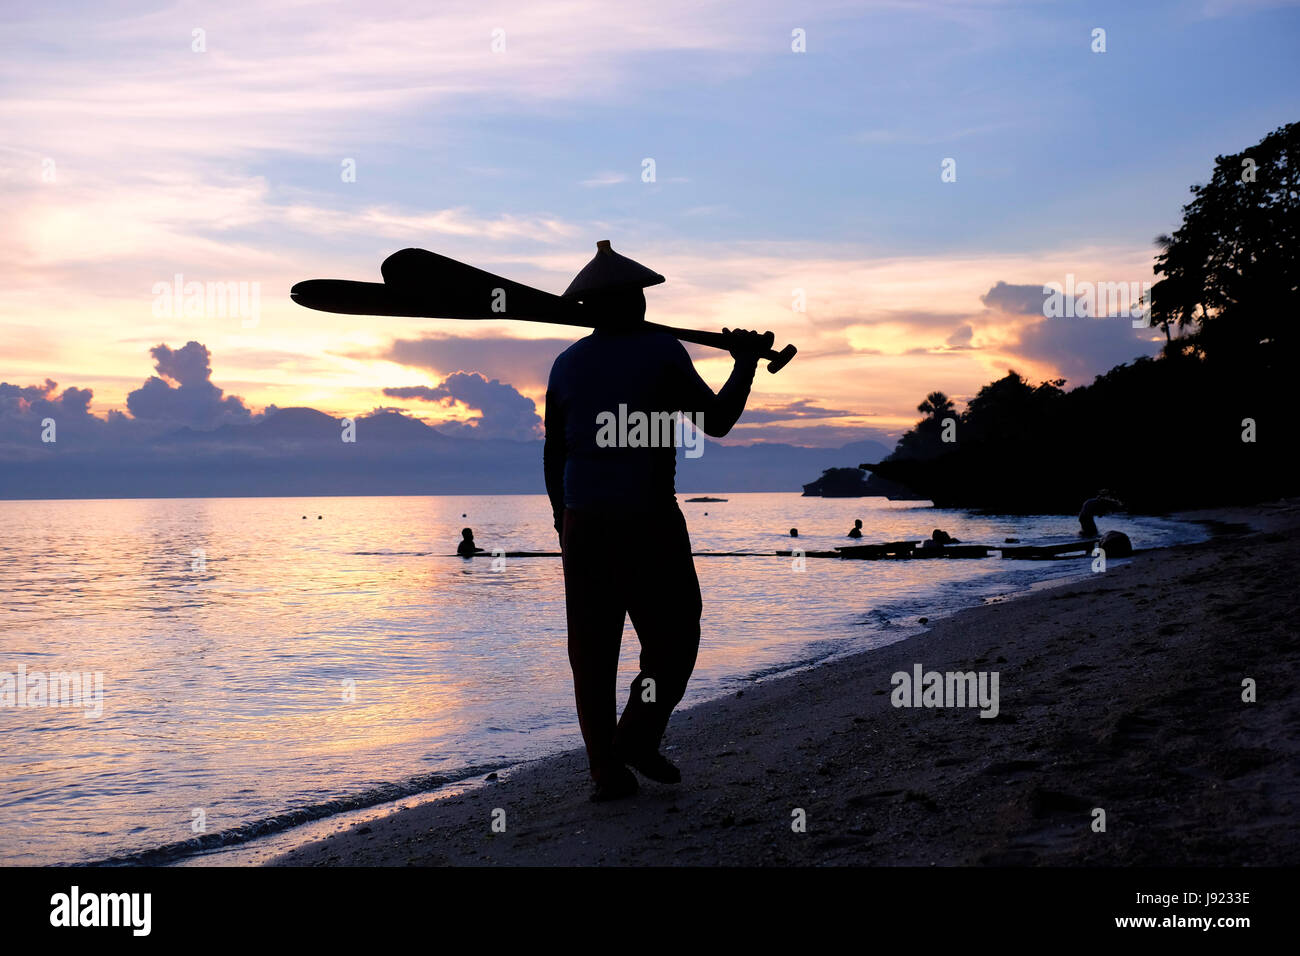 Chinese man bathing at sunset in the island of Siquijor located in the Central Visayas region of the Philippines Stock Photo